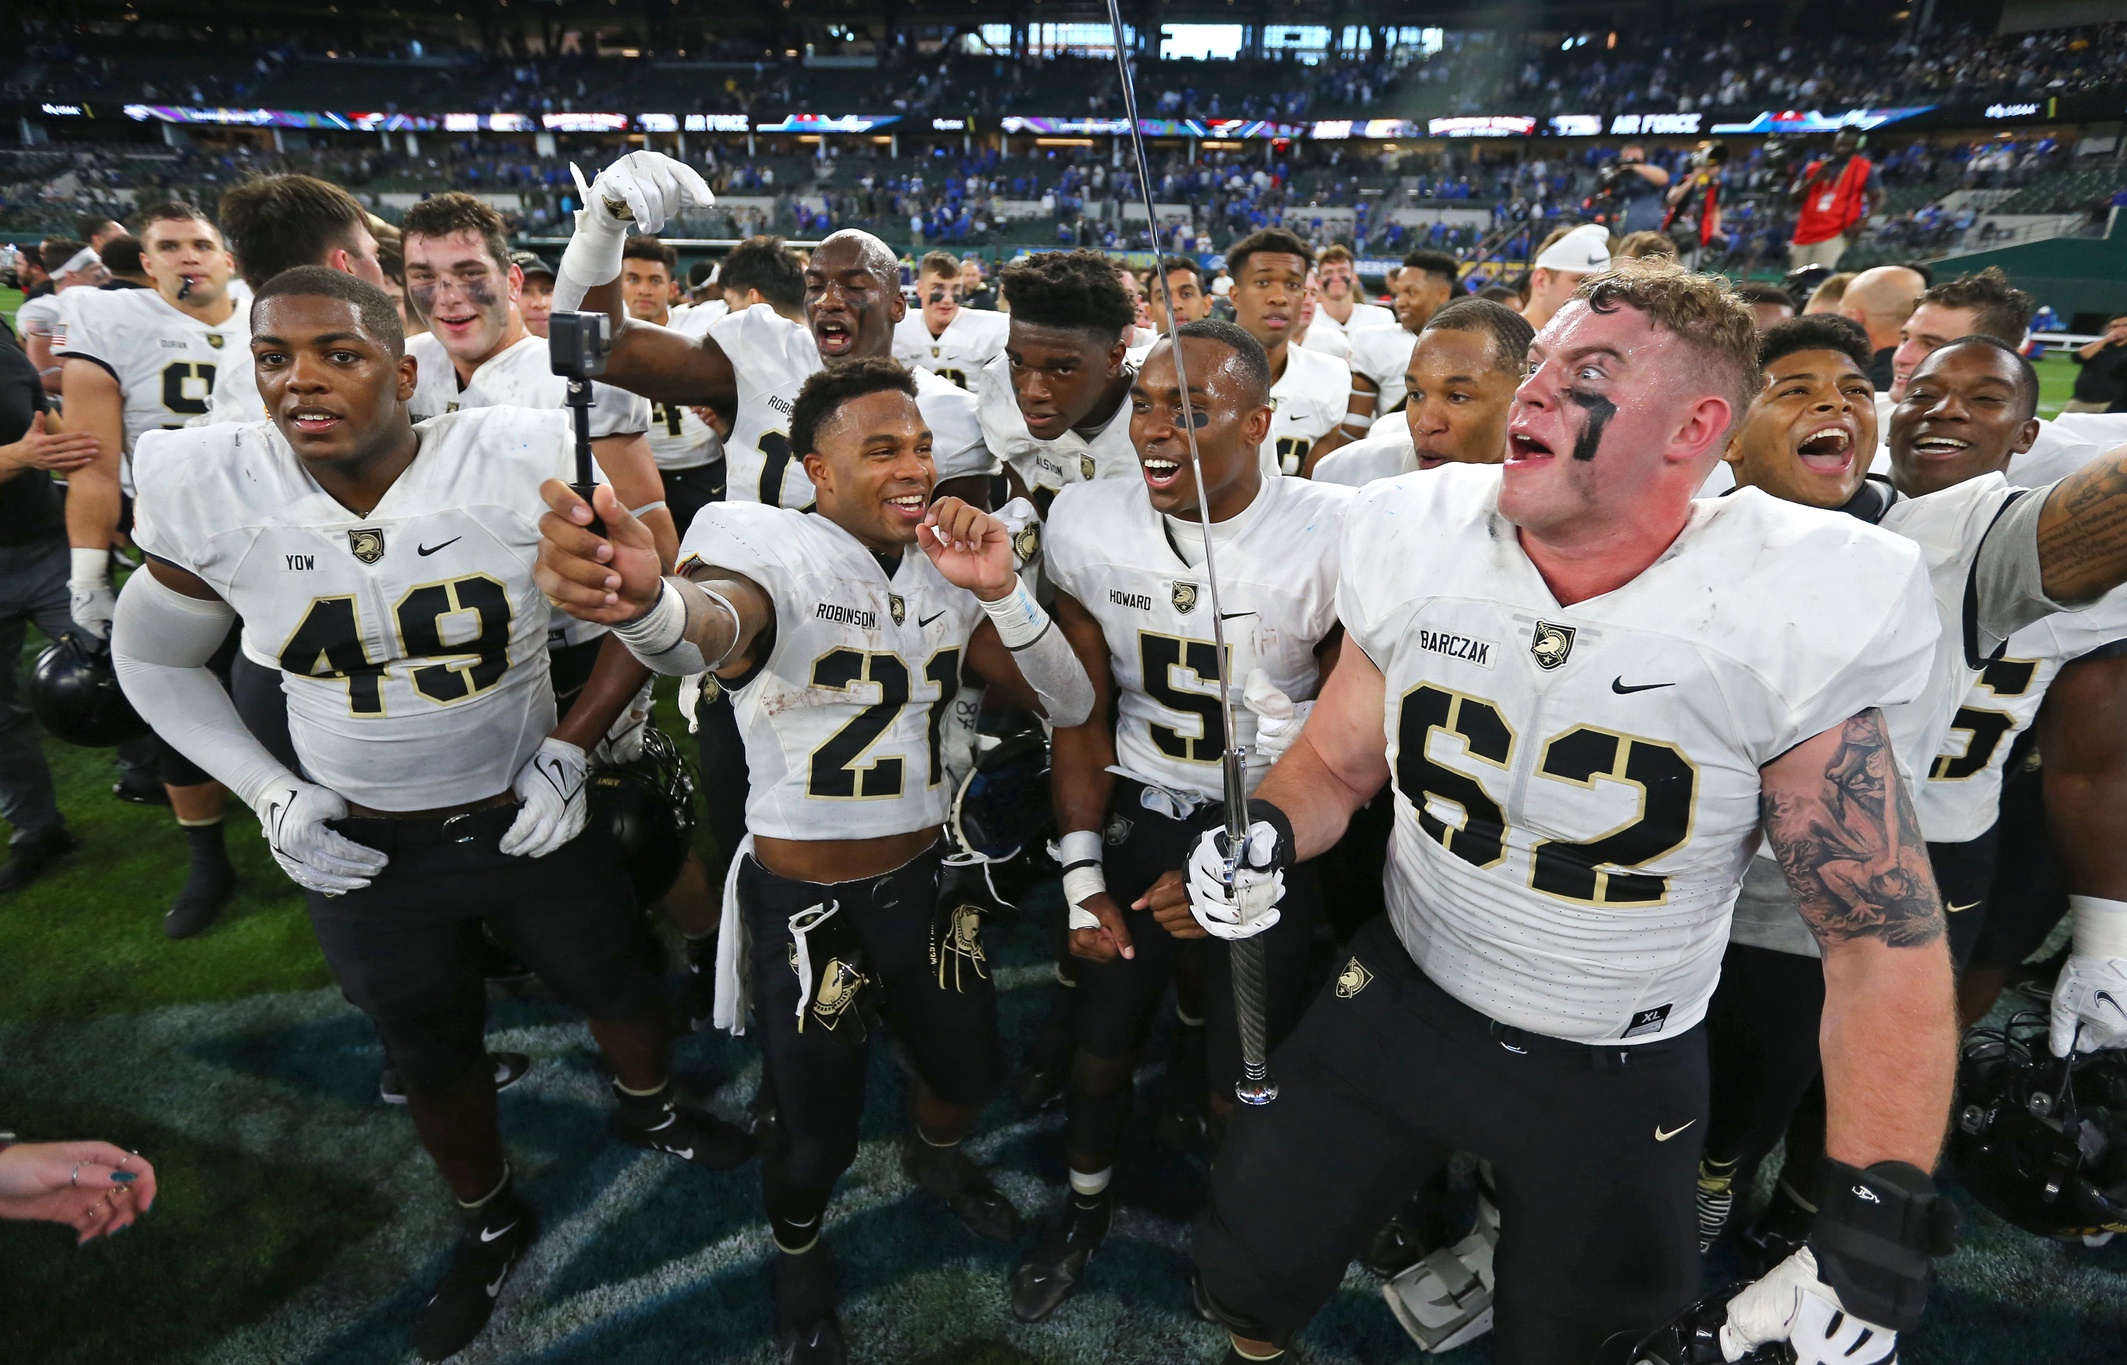 Bucknell Bison vs. Army Black Knights – 11/13/2021 Free Pick & CFB Betting Prediction